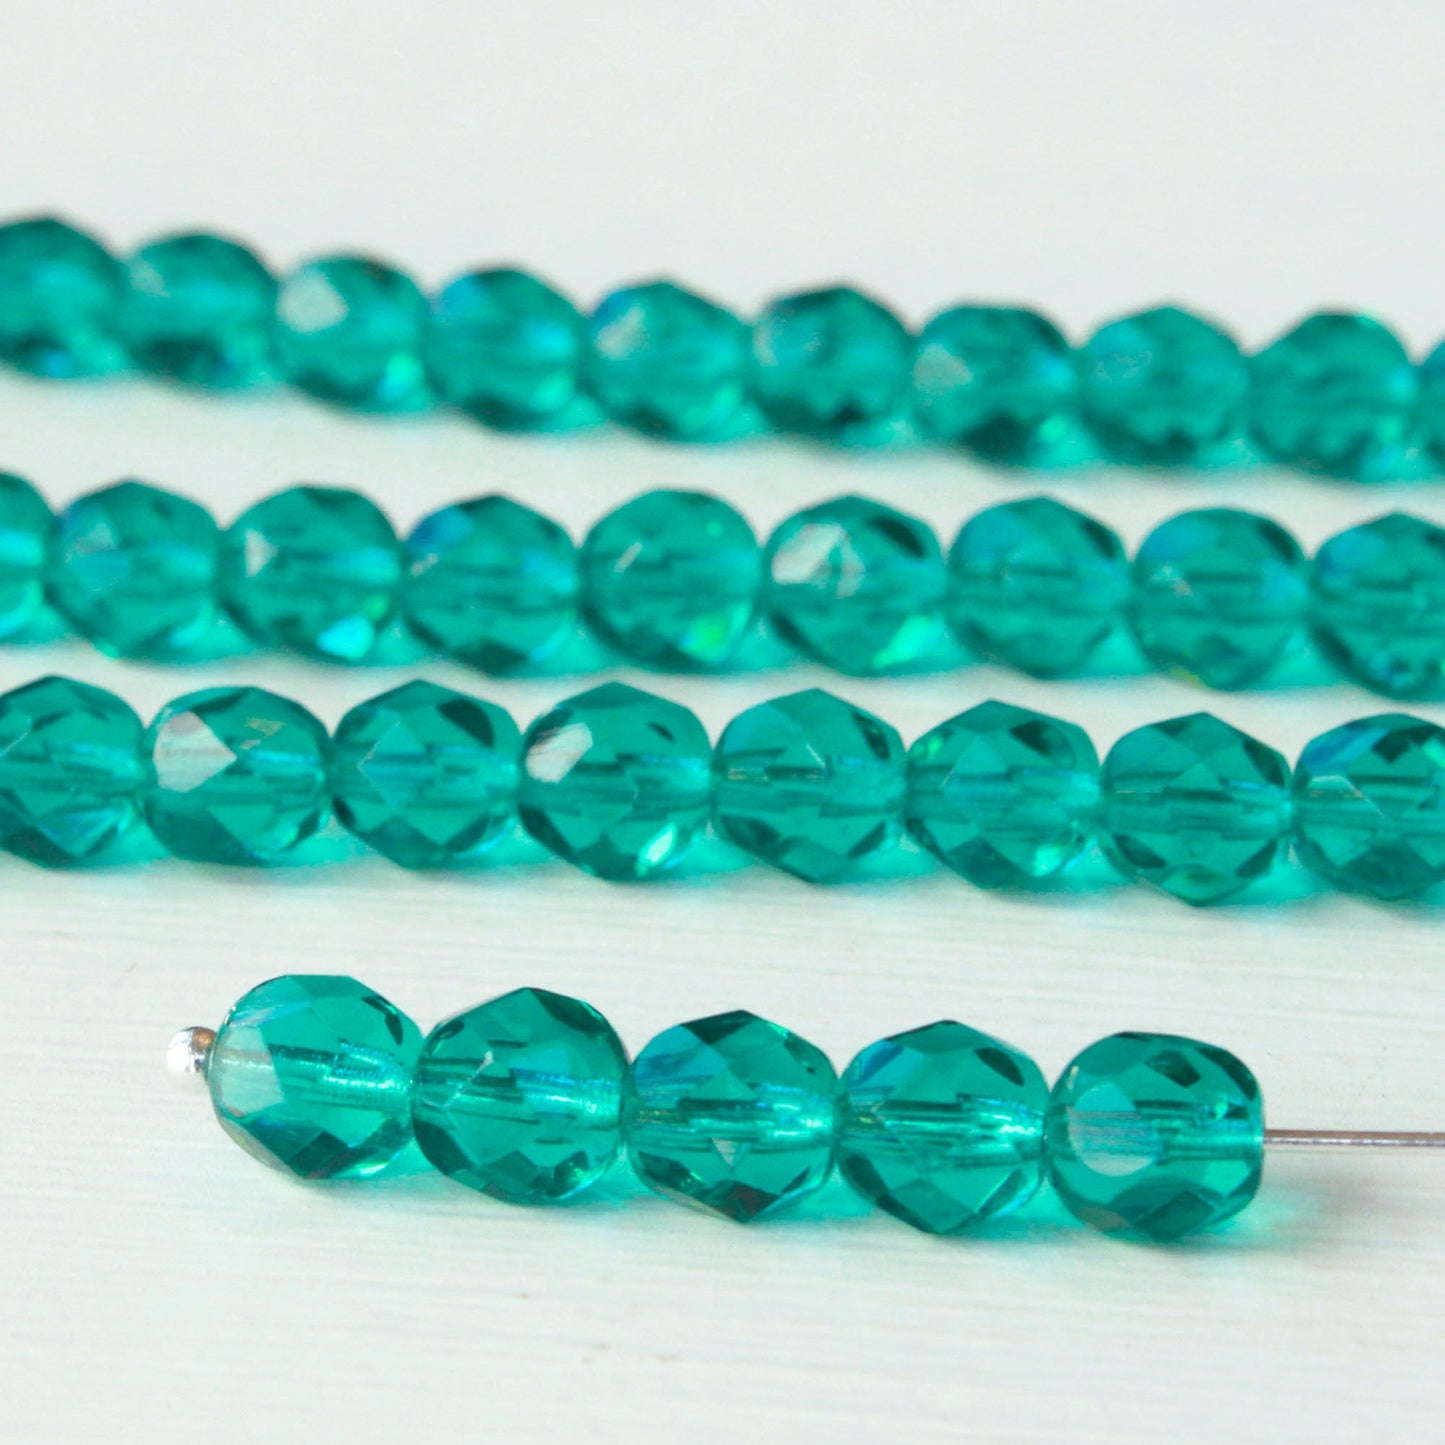 6mm Round Firepolished Glass Beads - Transparent Teal